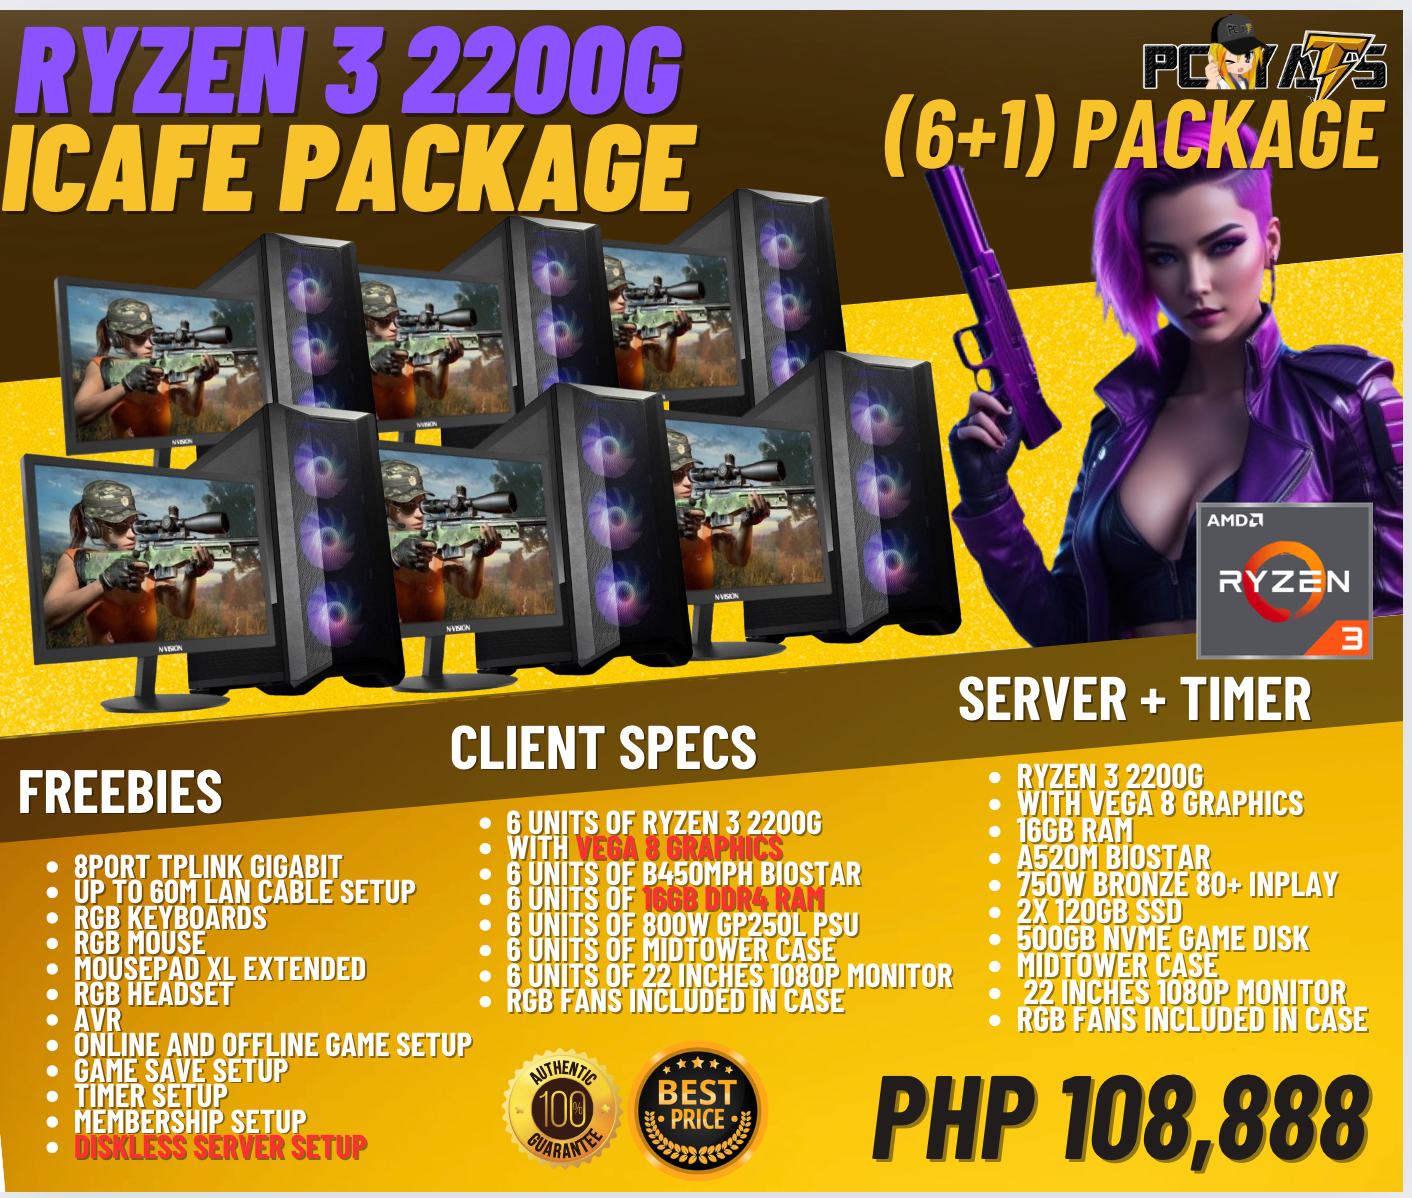 ICAFE PACKAGES PACKAGE 1A: Ryzen 3 2200G (6+1) WITH FREE SERVER AND TIMER CONFIGURATION